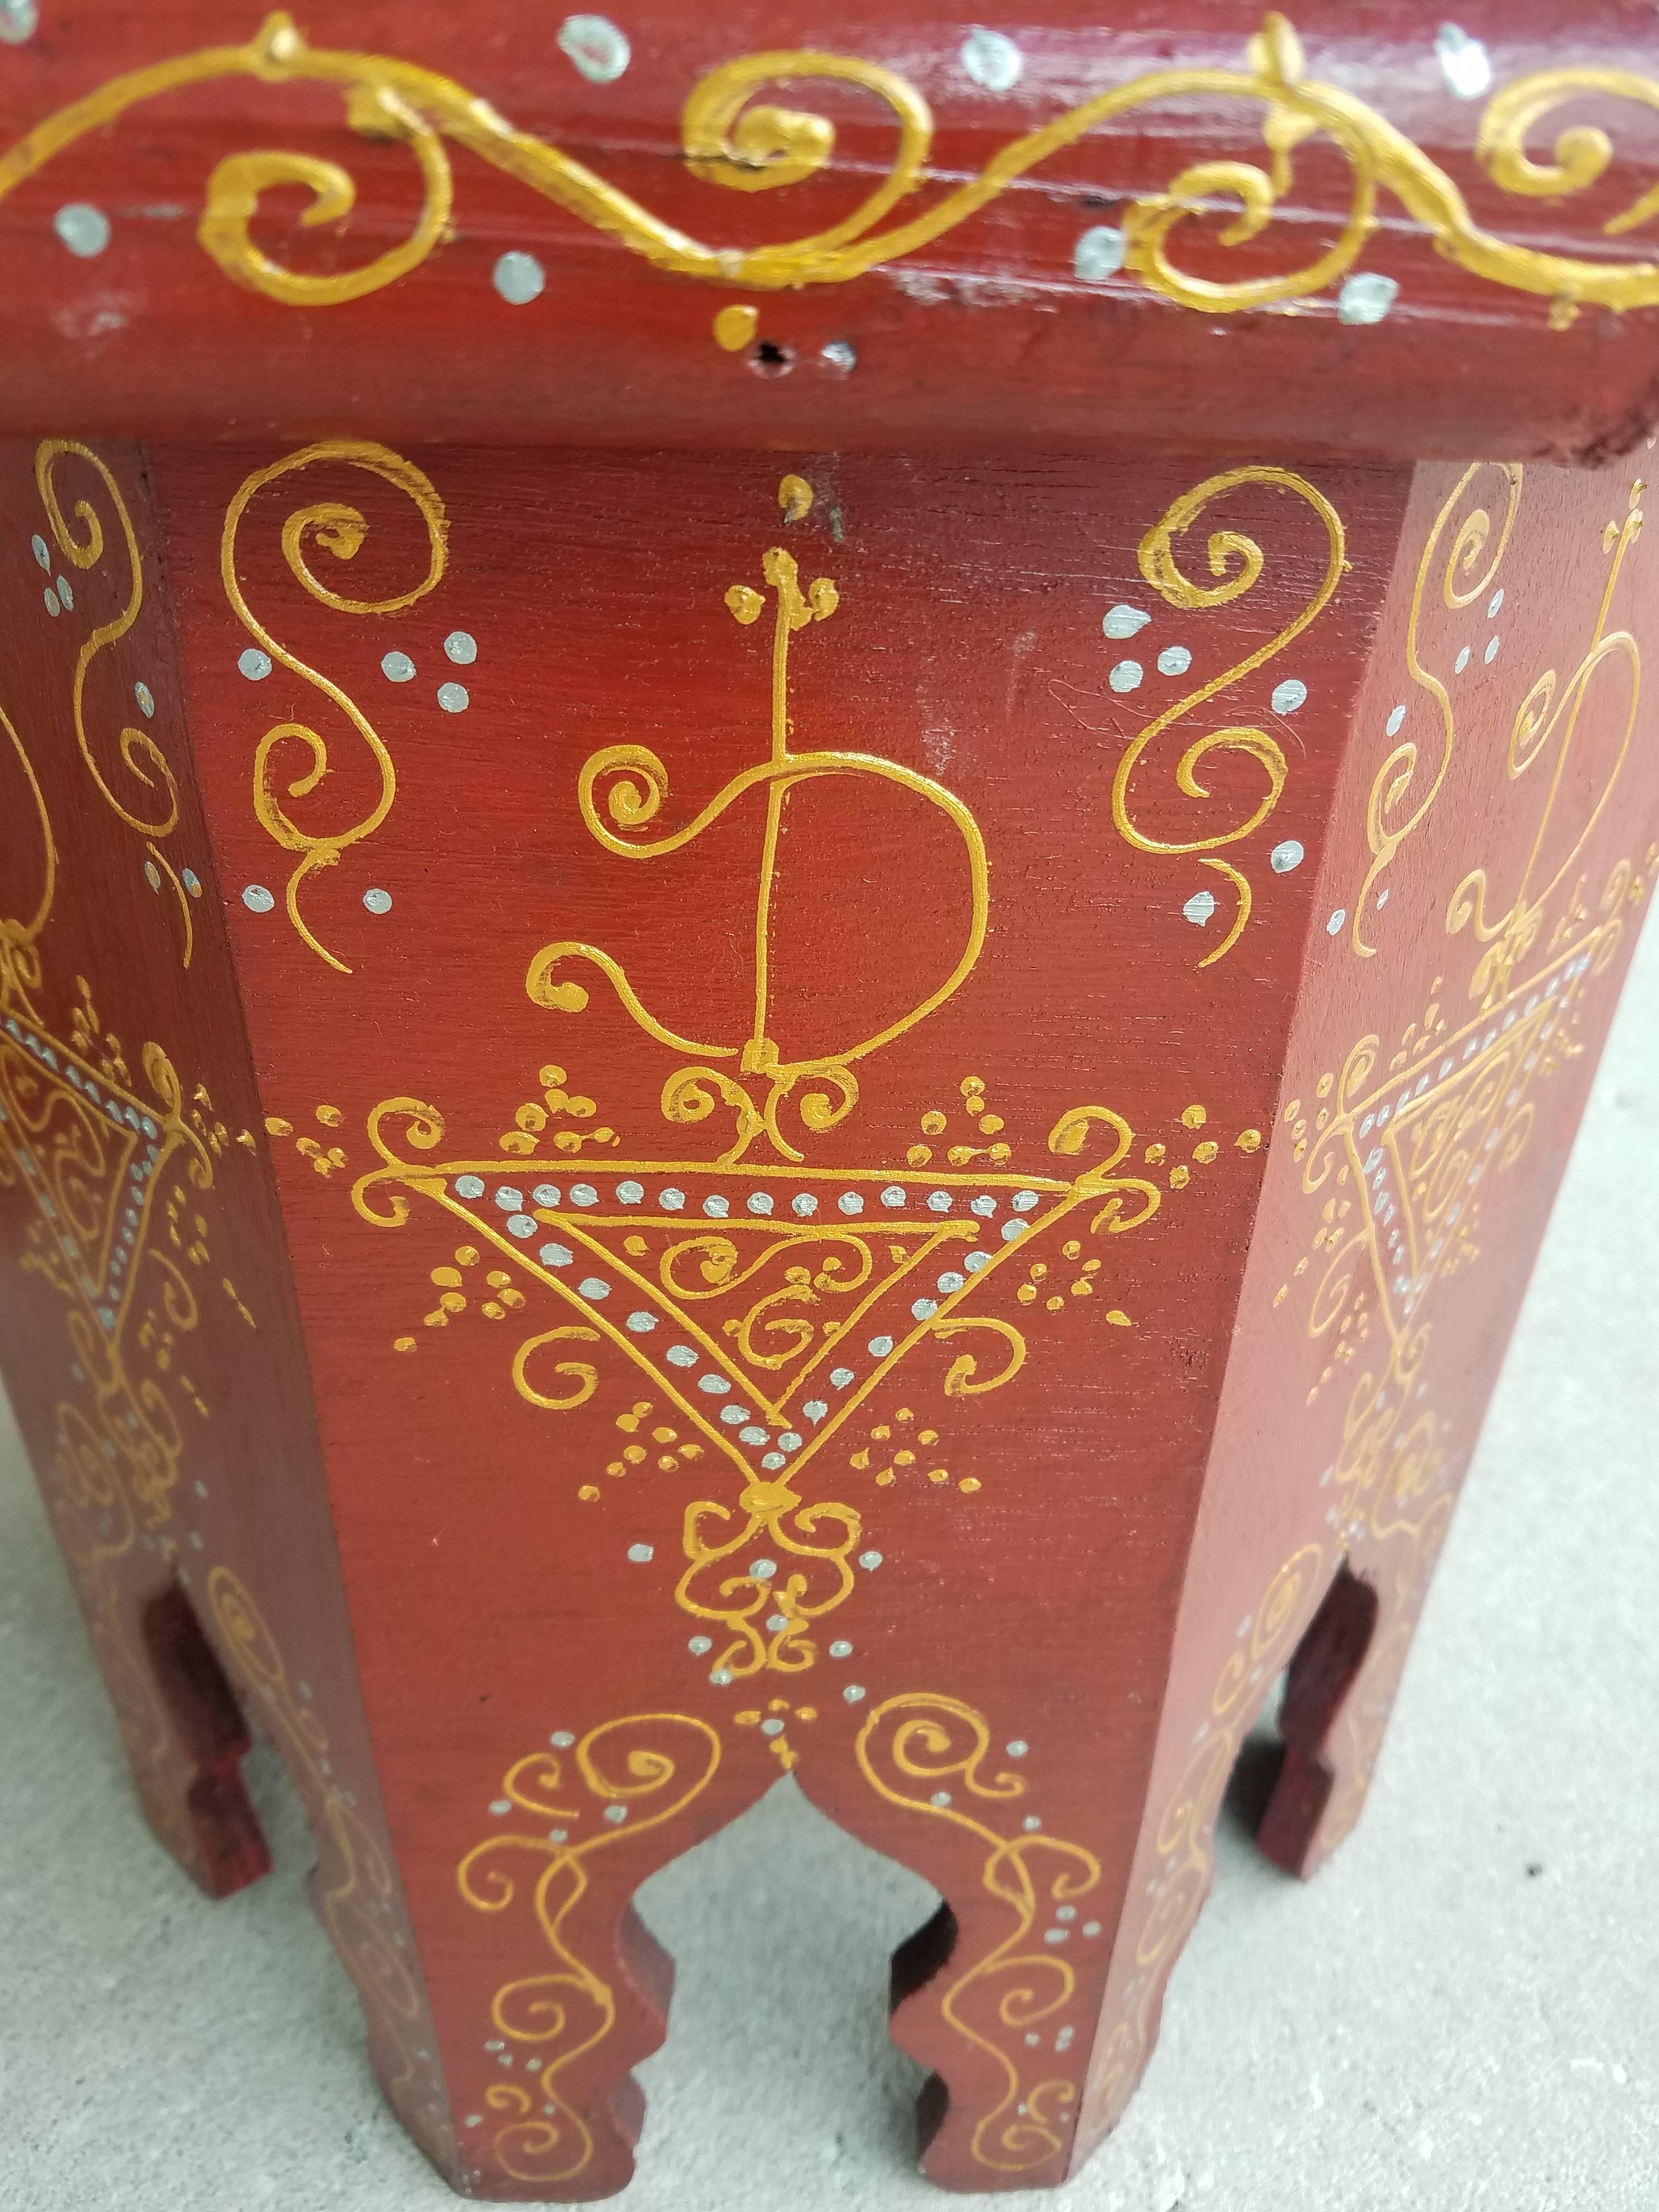 Rare find! 100% hand-painted Moroccan hexagonal shape side table. Red base with gold color design. Great handcraftsmanship throughout. Beautiful add-on to your decor. This table measures approximately 14